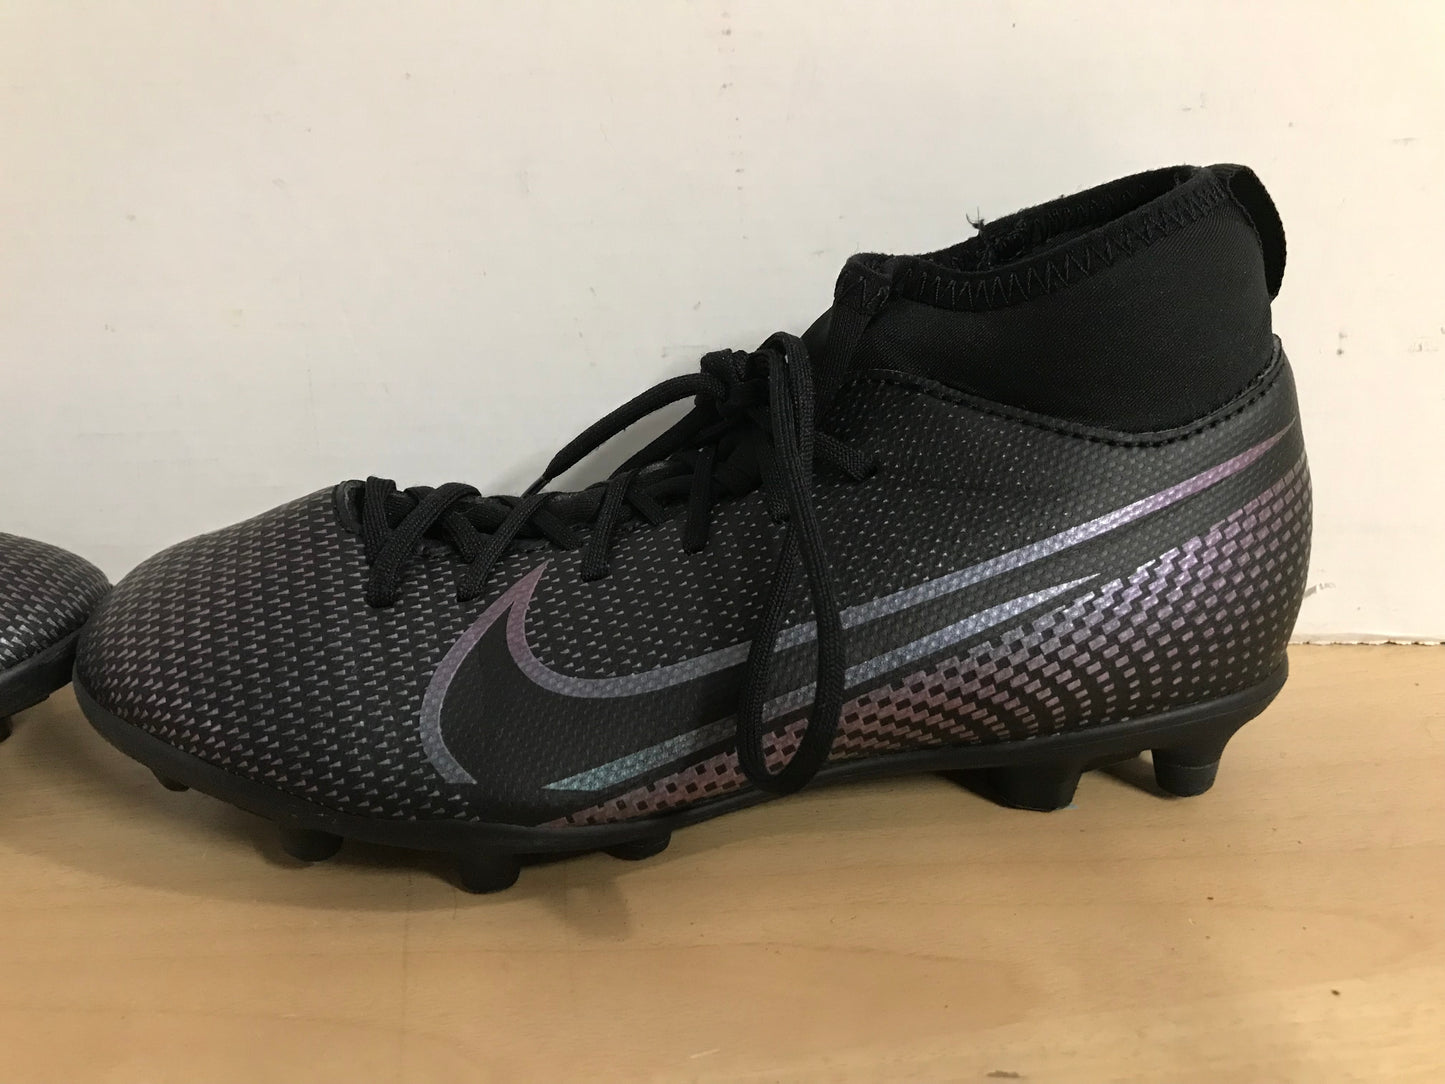 Soccer Shoes Cleats Child Size 4 Nike Mercurial Slipper Foot Black Grey Excellent